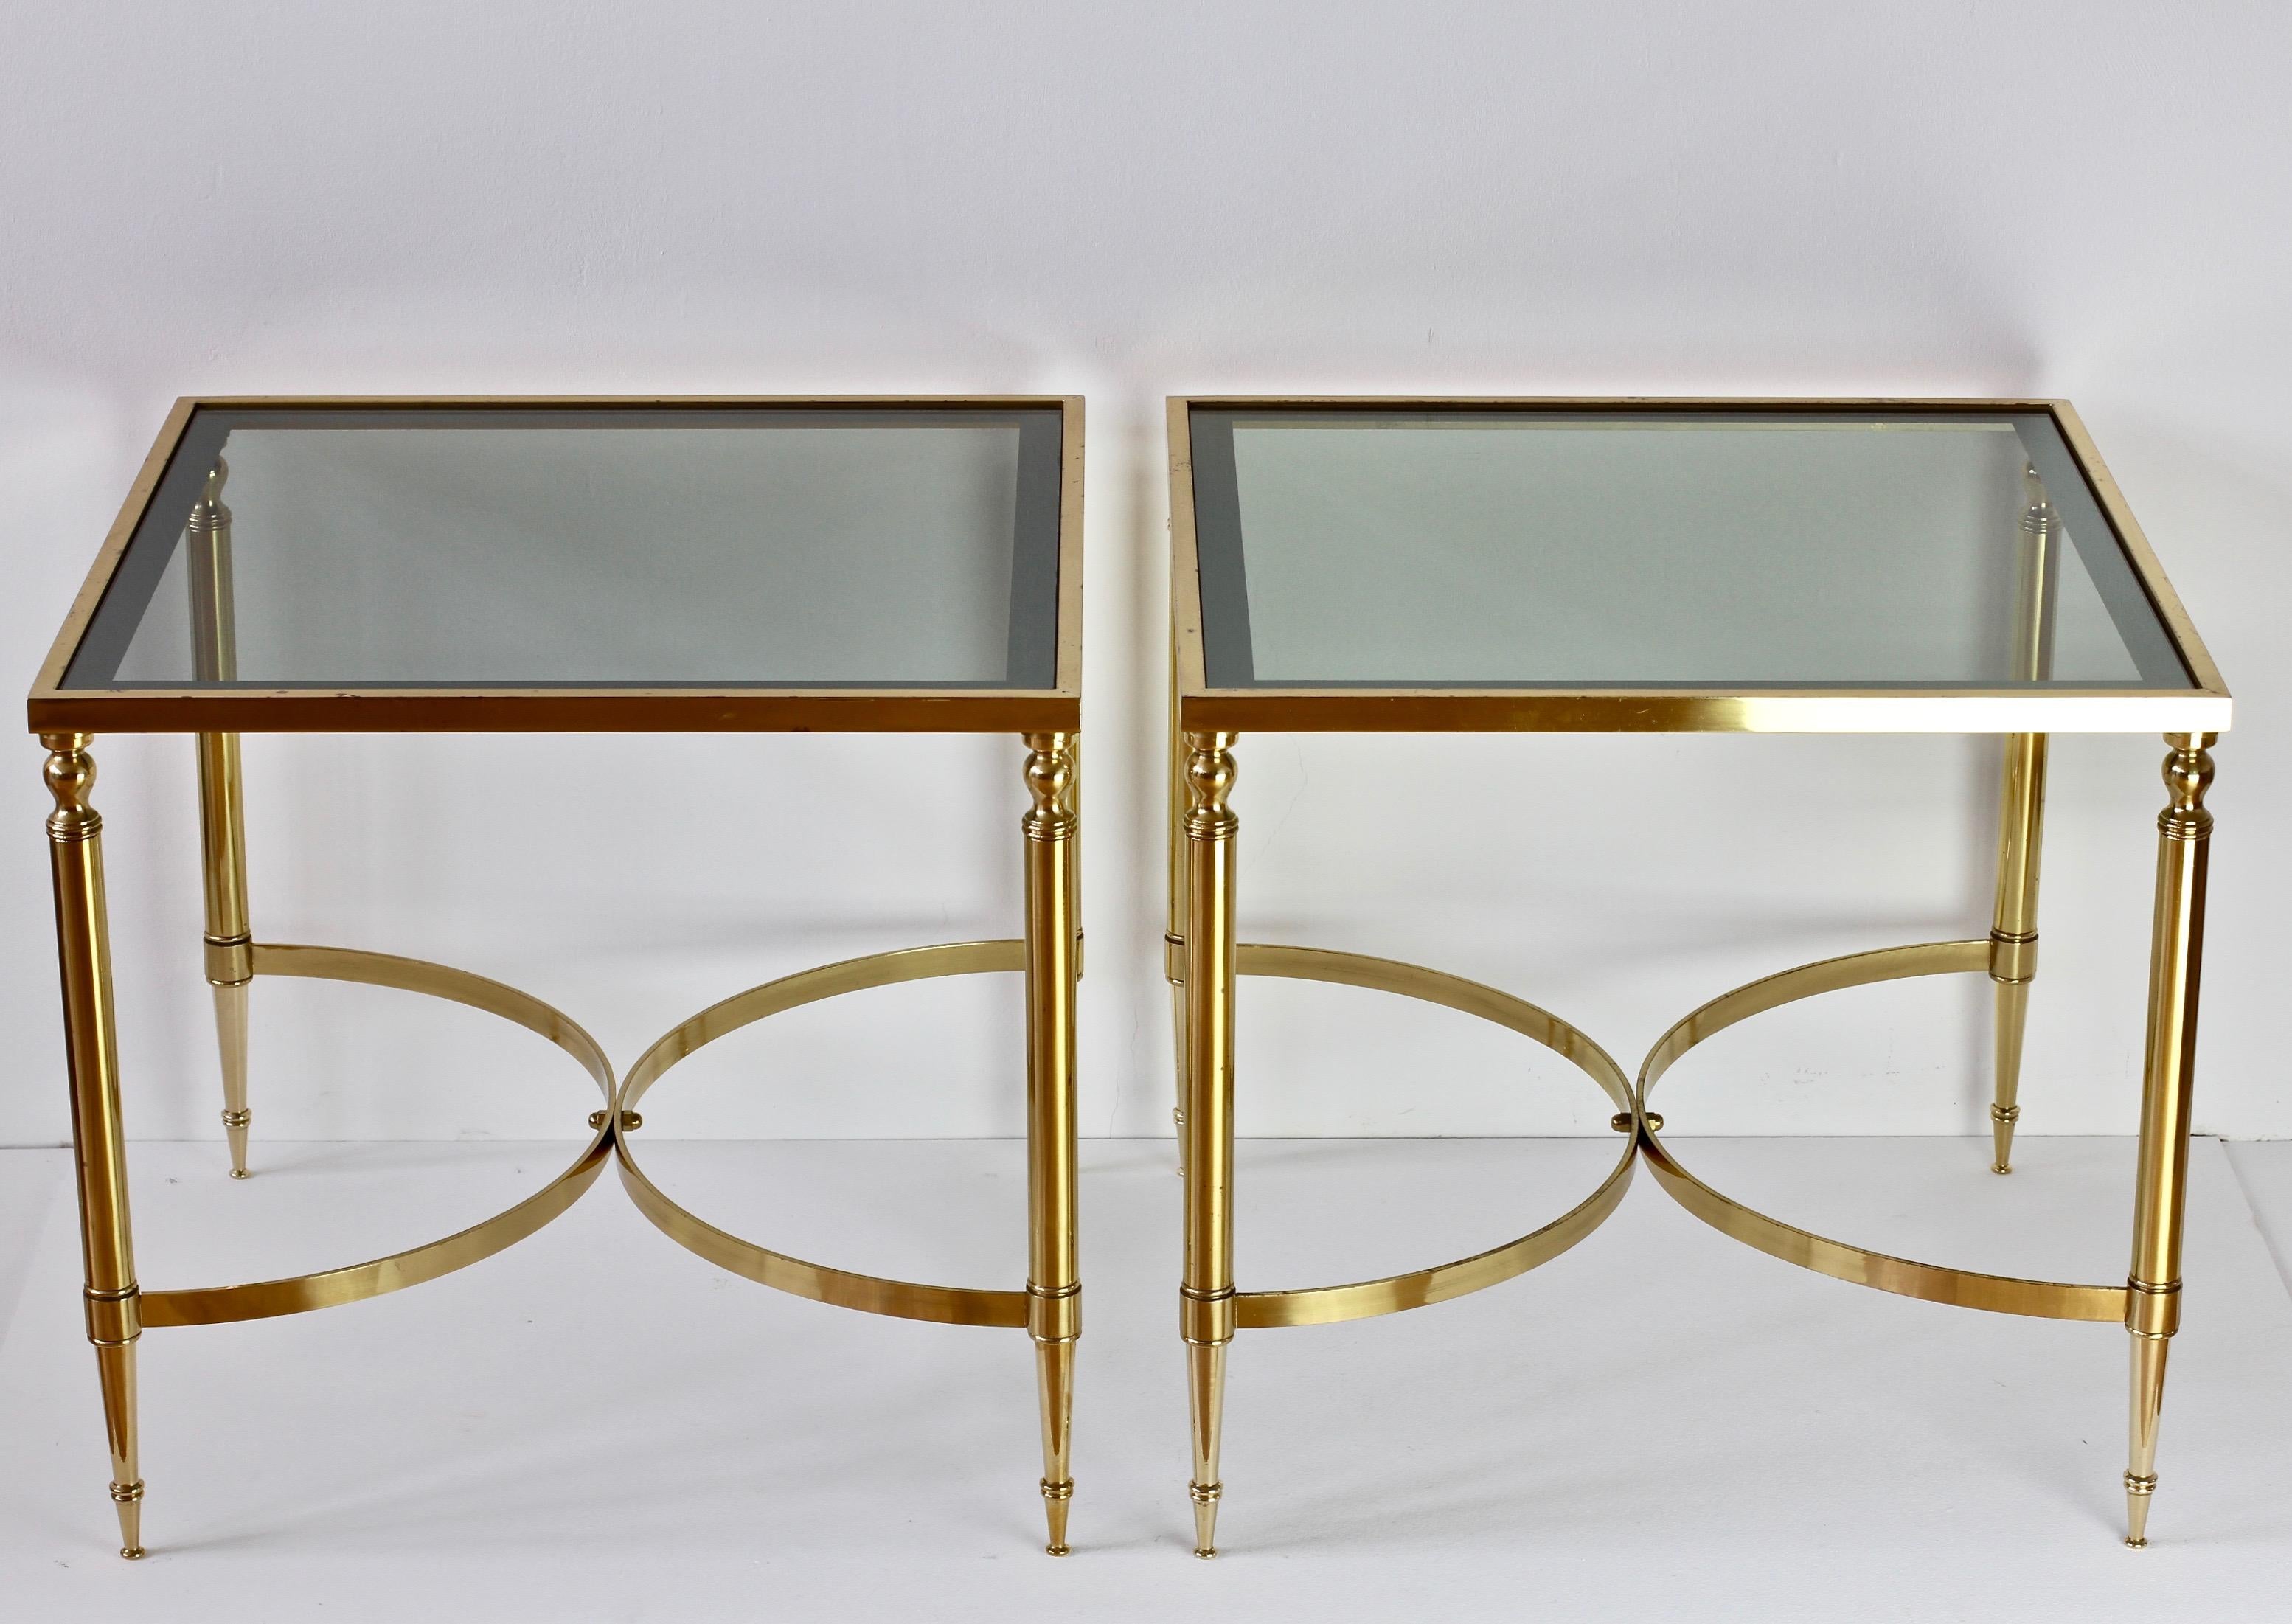 20th Century Maison Jansen Style Pair of French Brass & Glass Side / End Tables / Nightstands